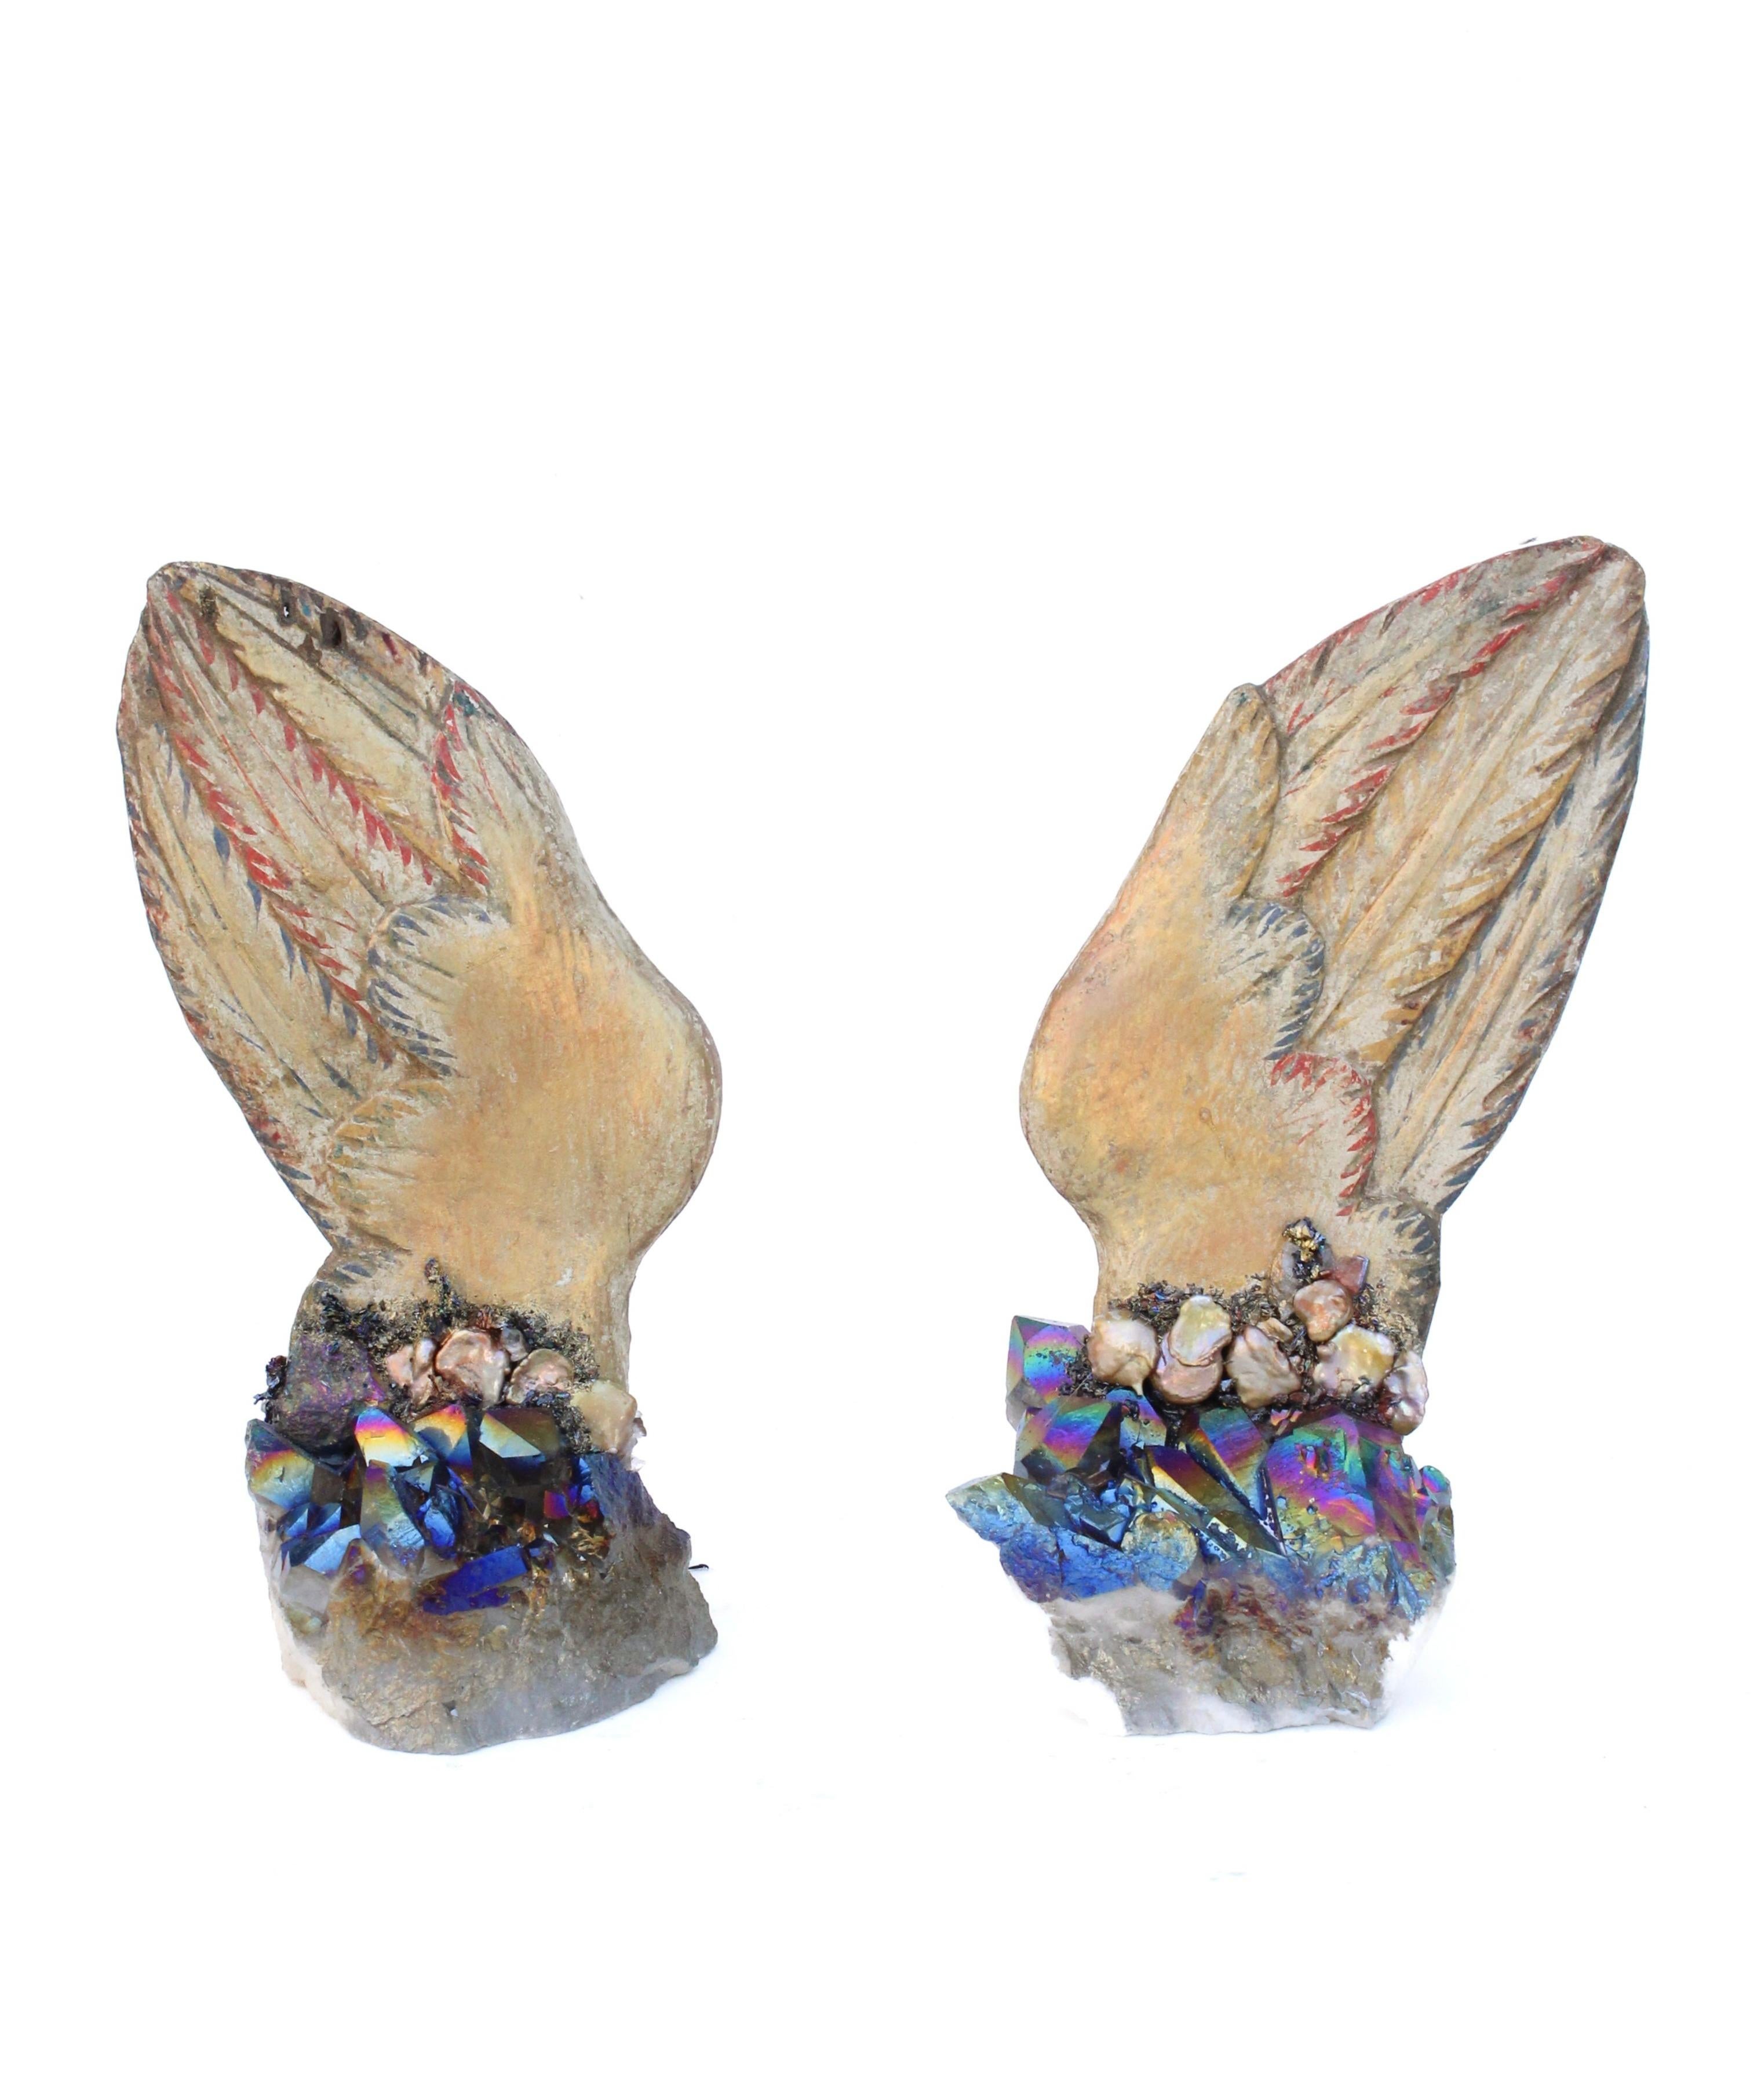 Pair of 18th century Italian hand-carved and painted angel wings on titanium plated quartz crystal clusters with natural-forming baroque pearls.

The hand-carved multi-colored angel wings are originally from a historical church in Venice, Italy.